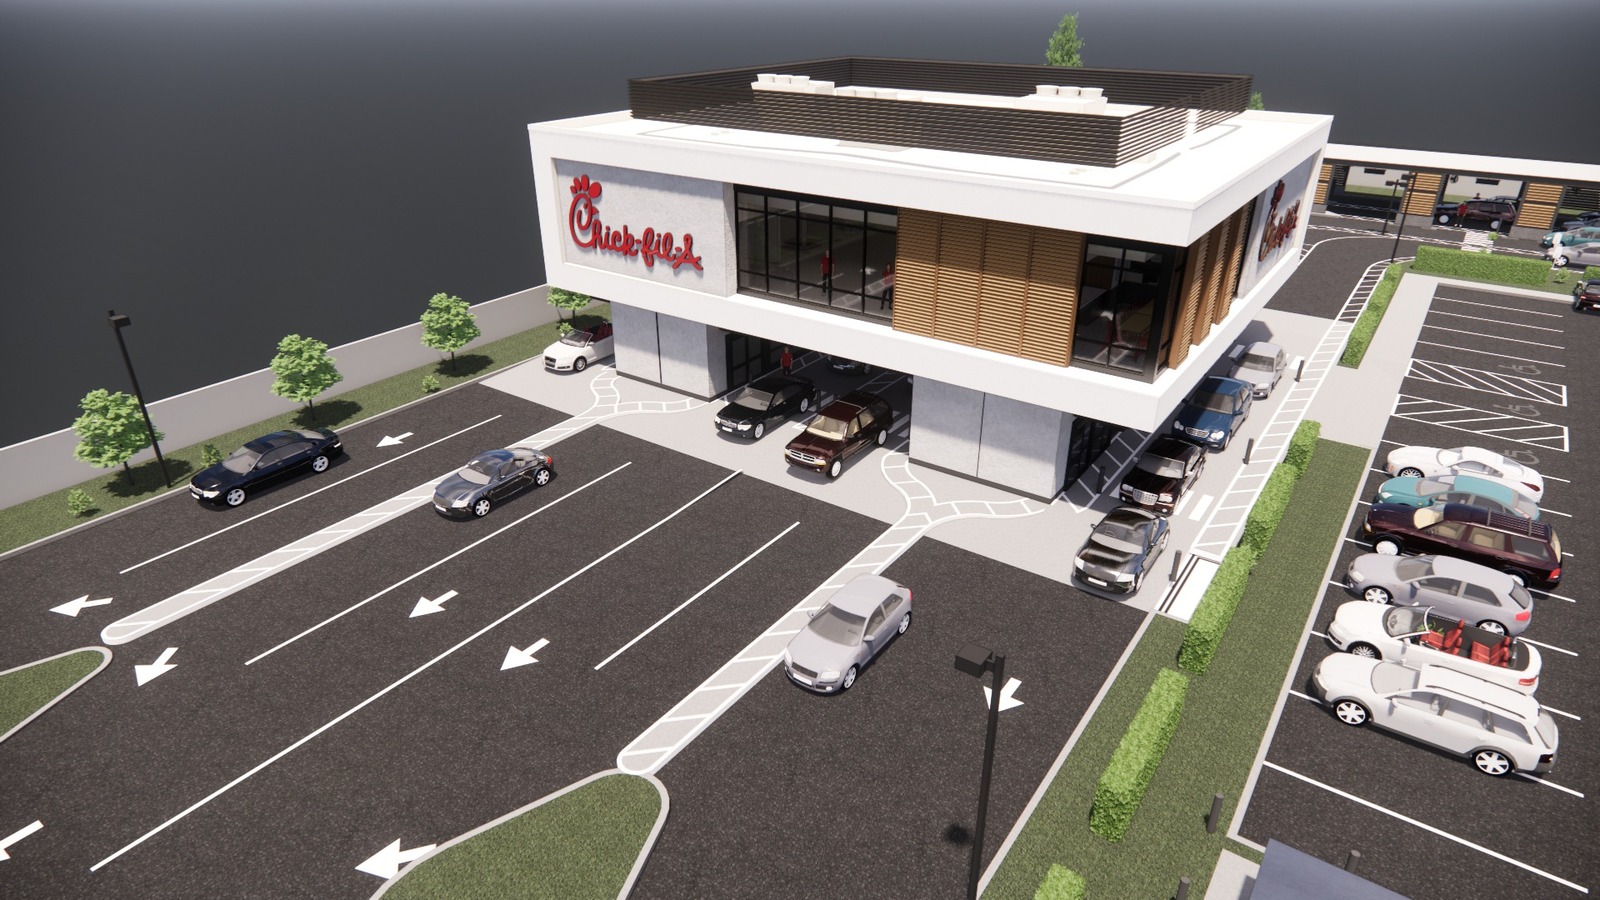 Chick-Fil-A Aims To Elevate Drive-Thrus For The Digital Age